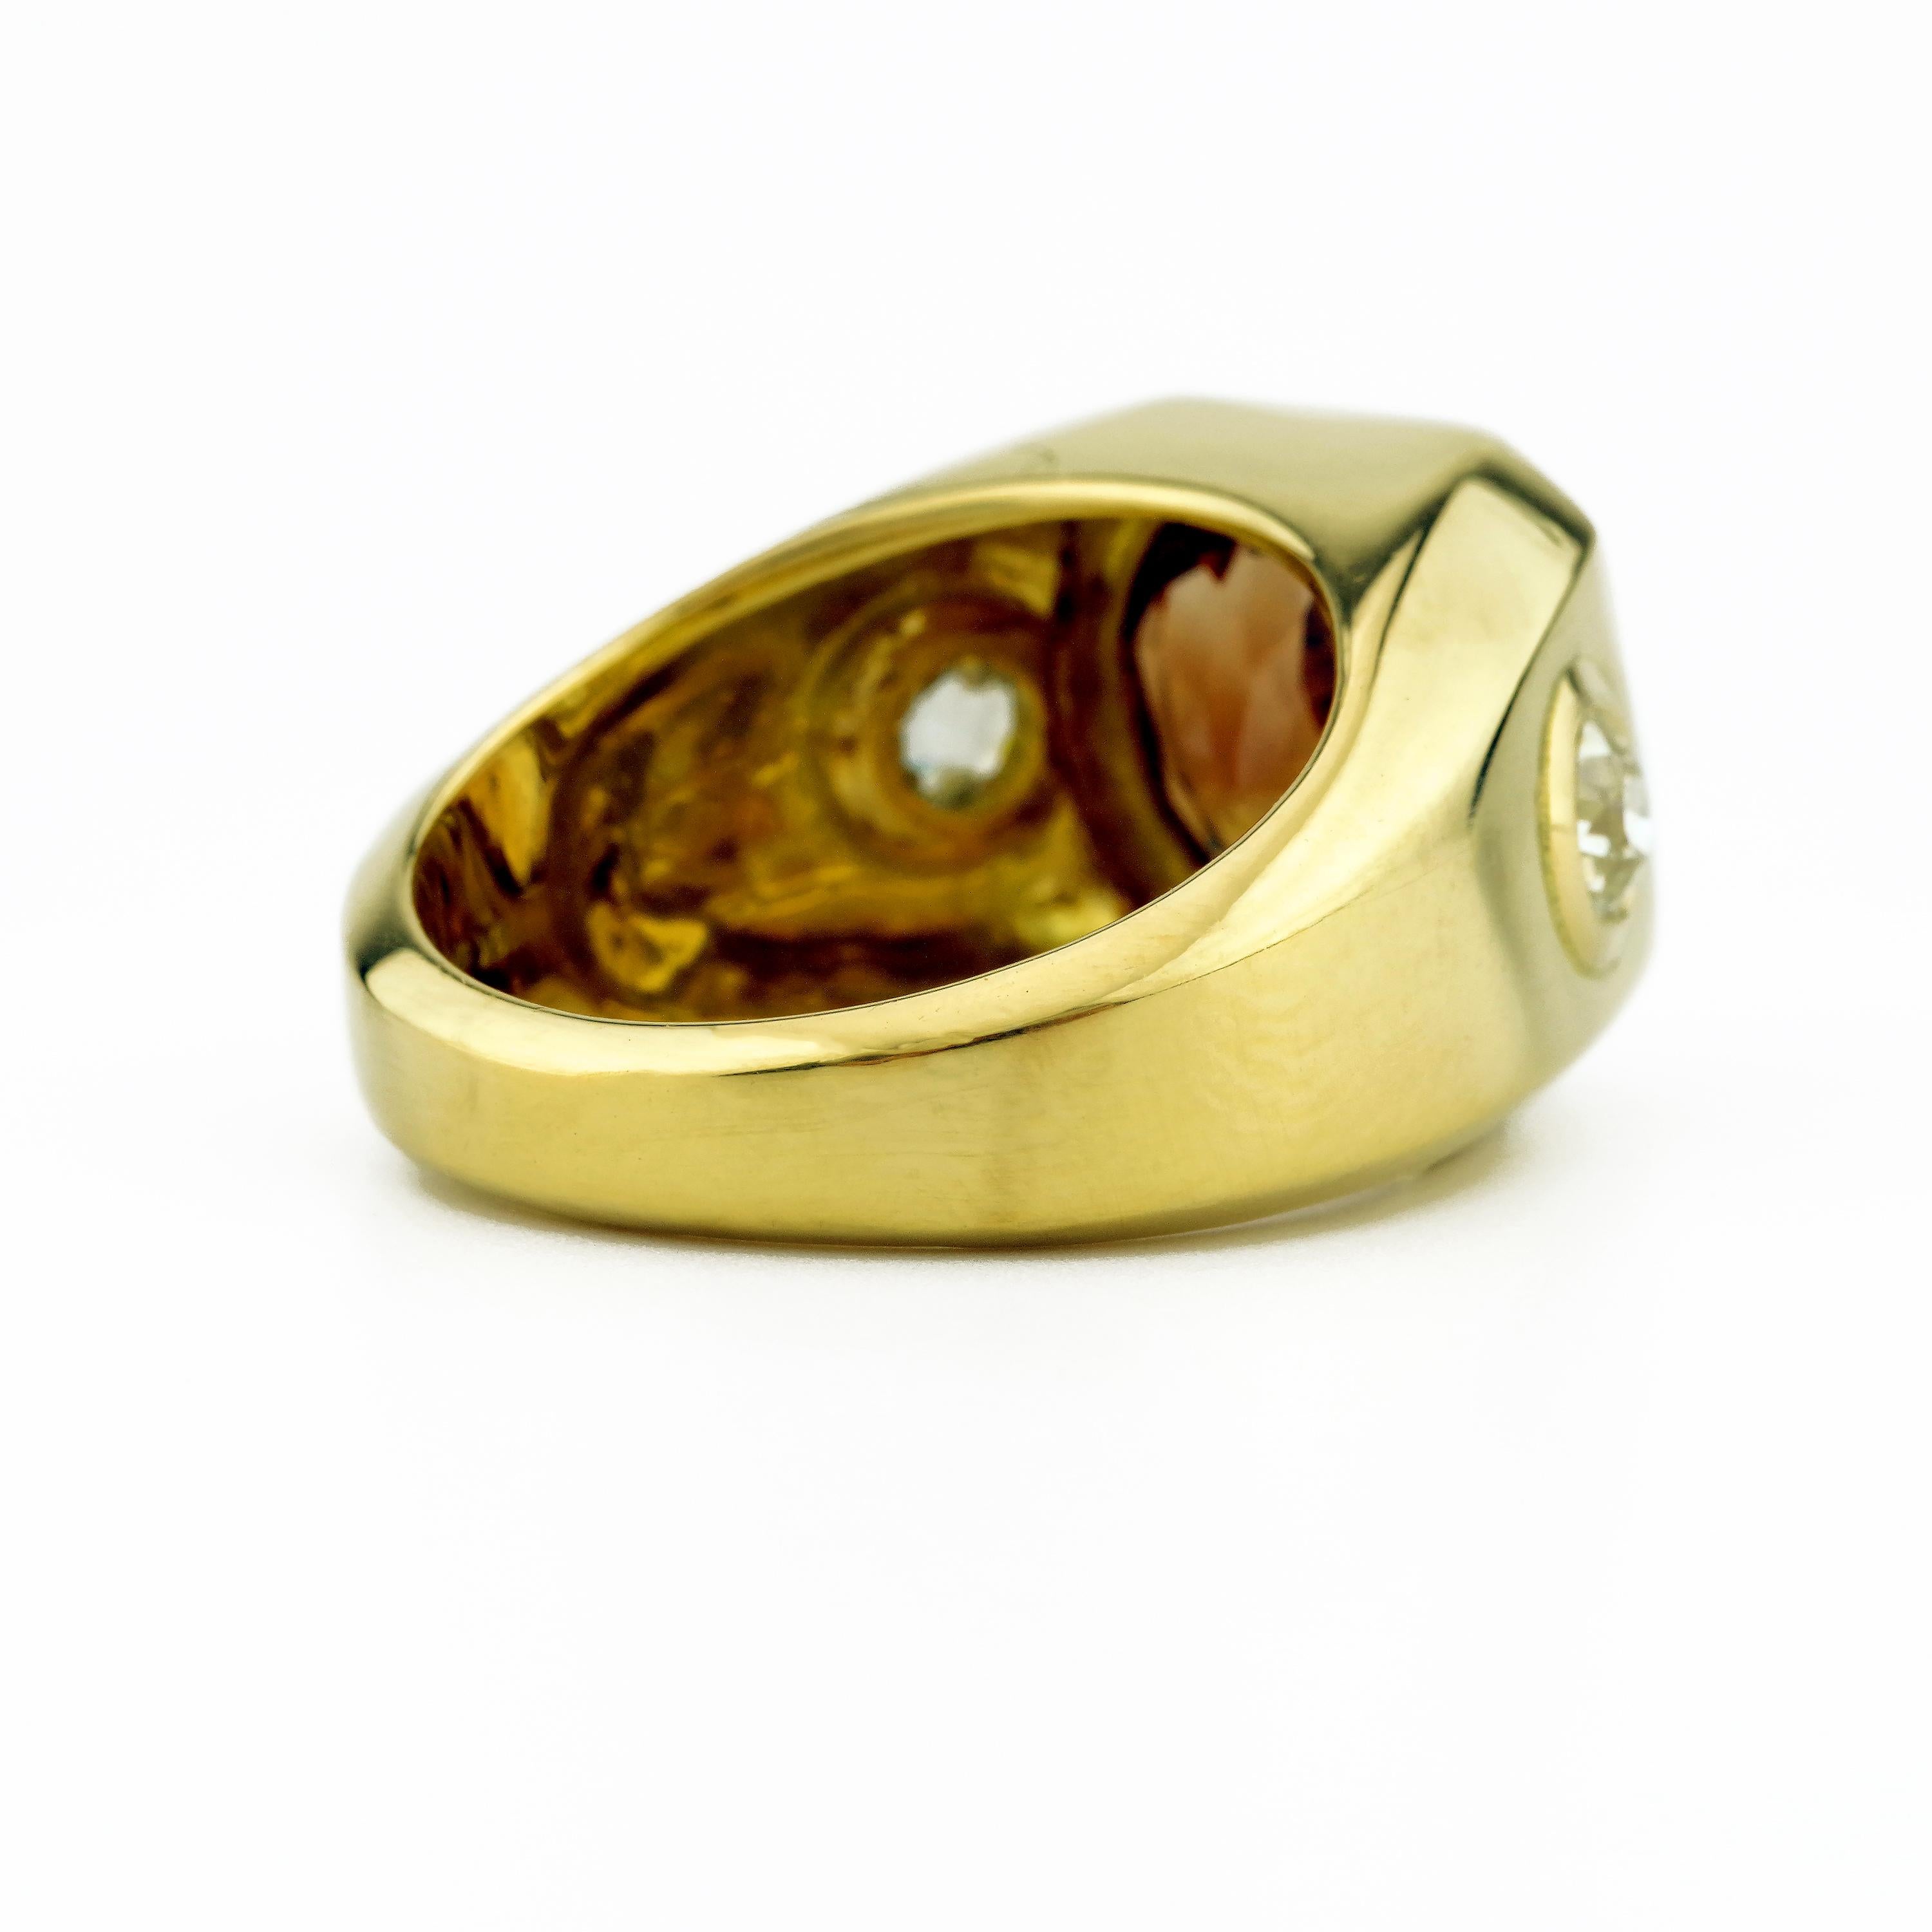 Men's Precious Topaz Ring in Whiskey is Ruggedly Handsome 3